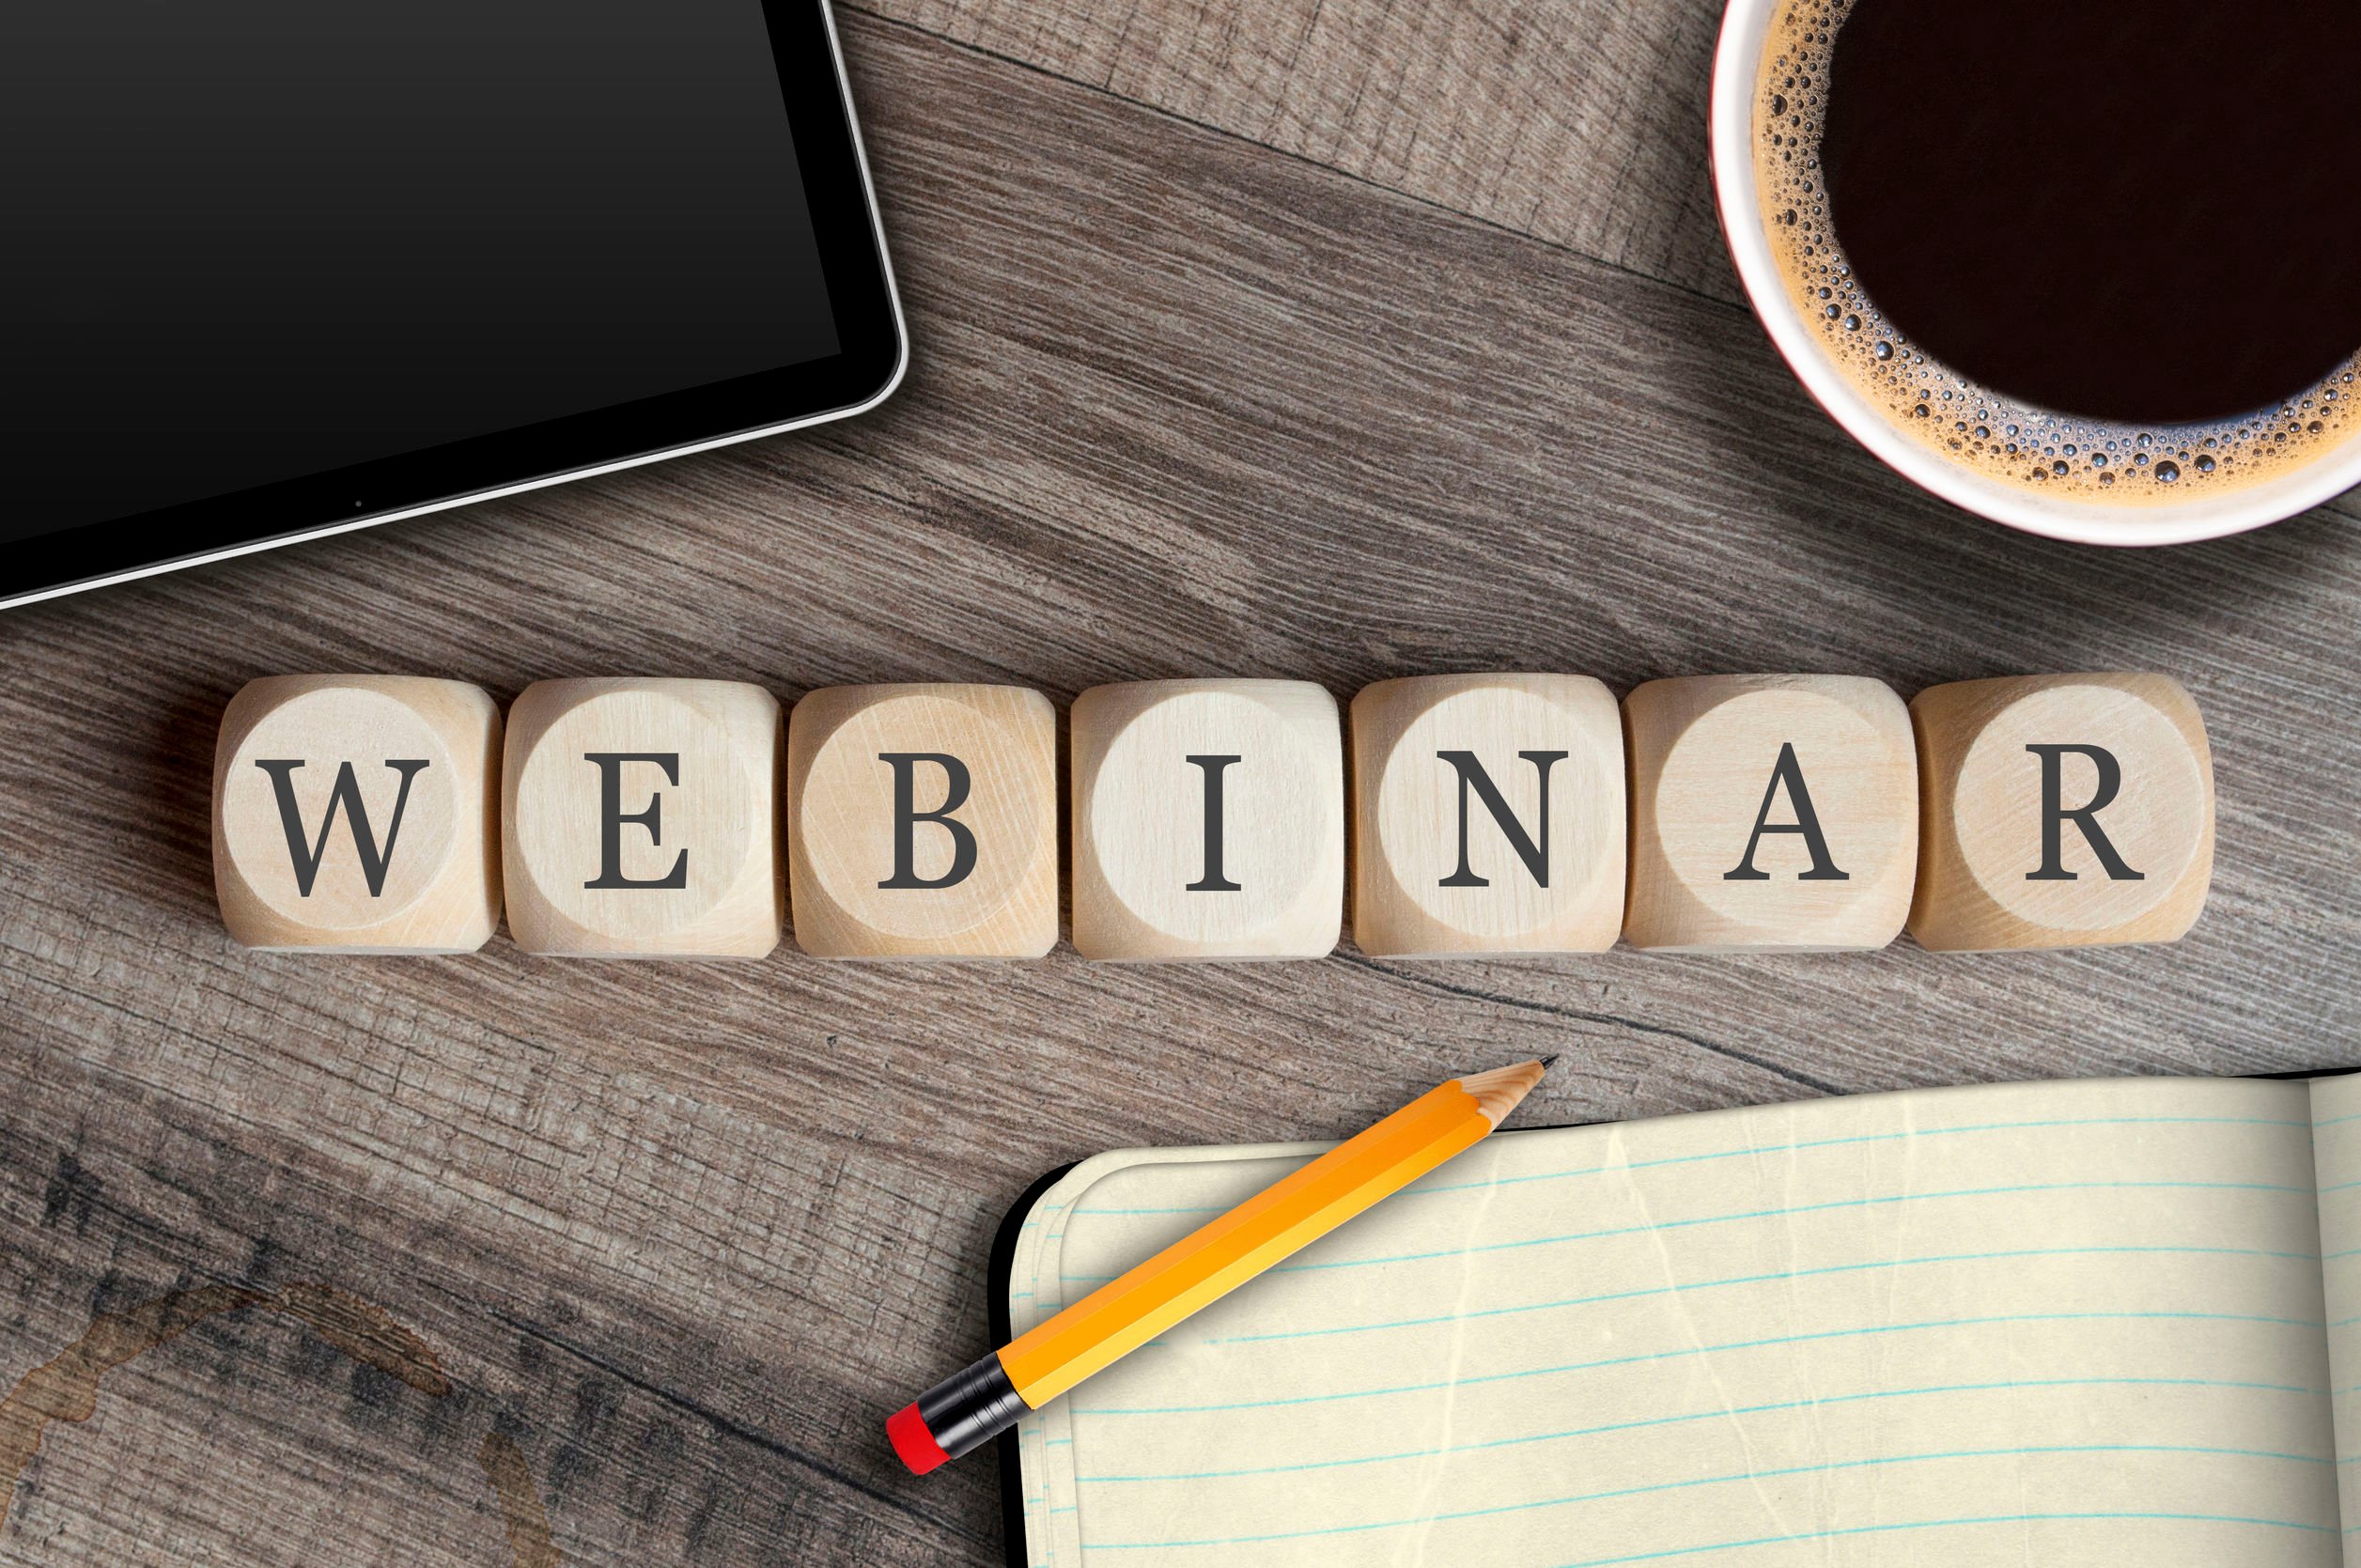 Take Your Business to the Next Level with aACE – Learn How in Our October Webinars